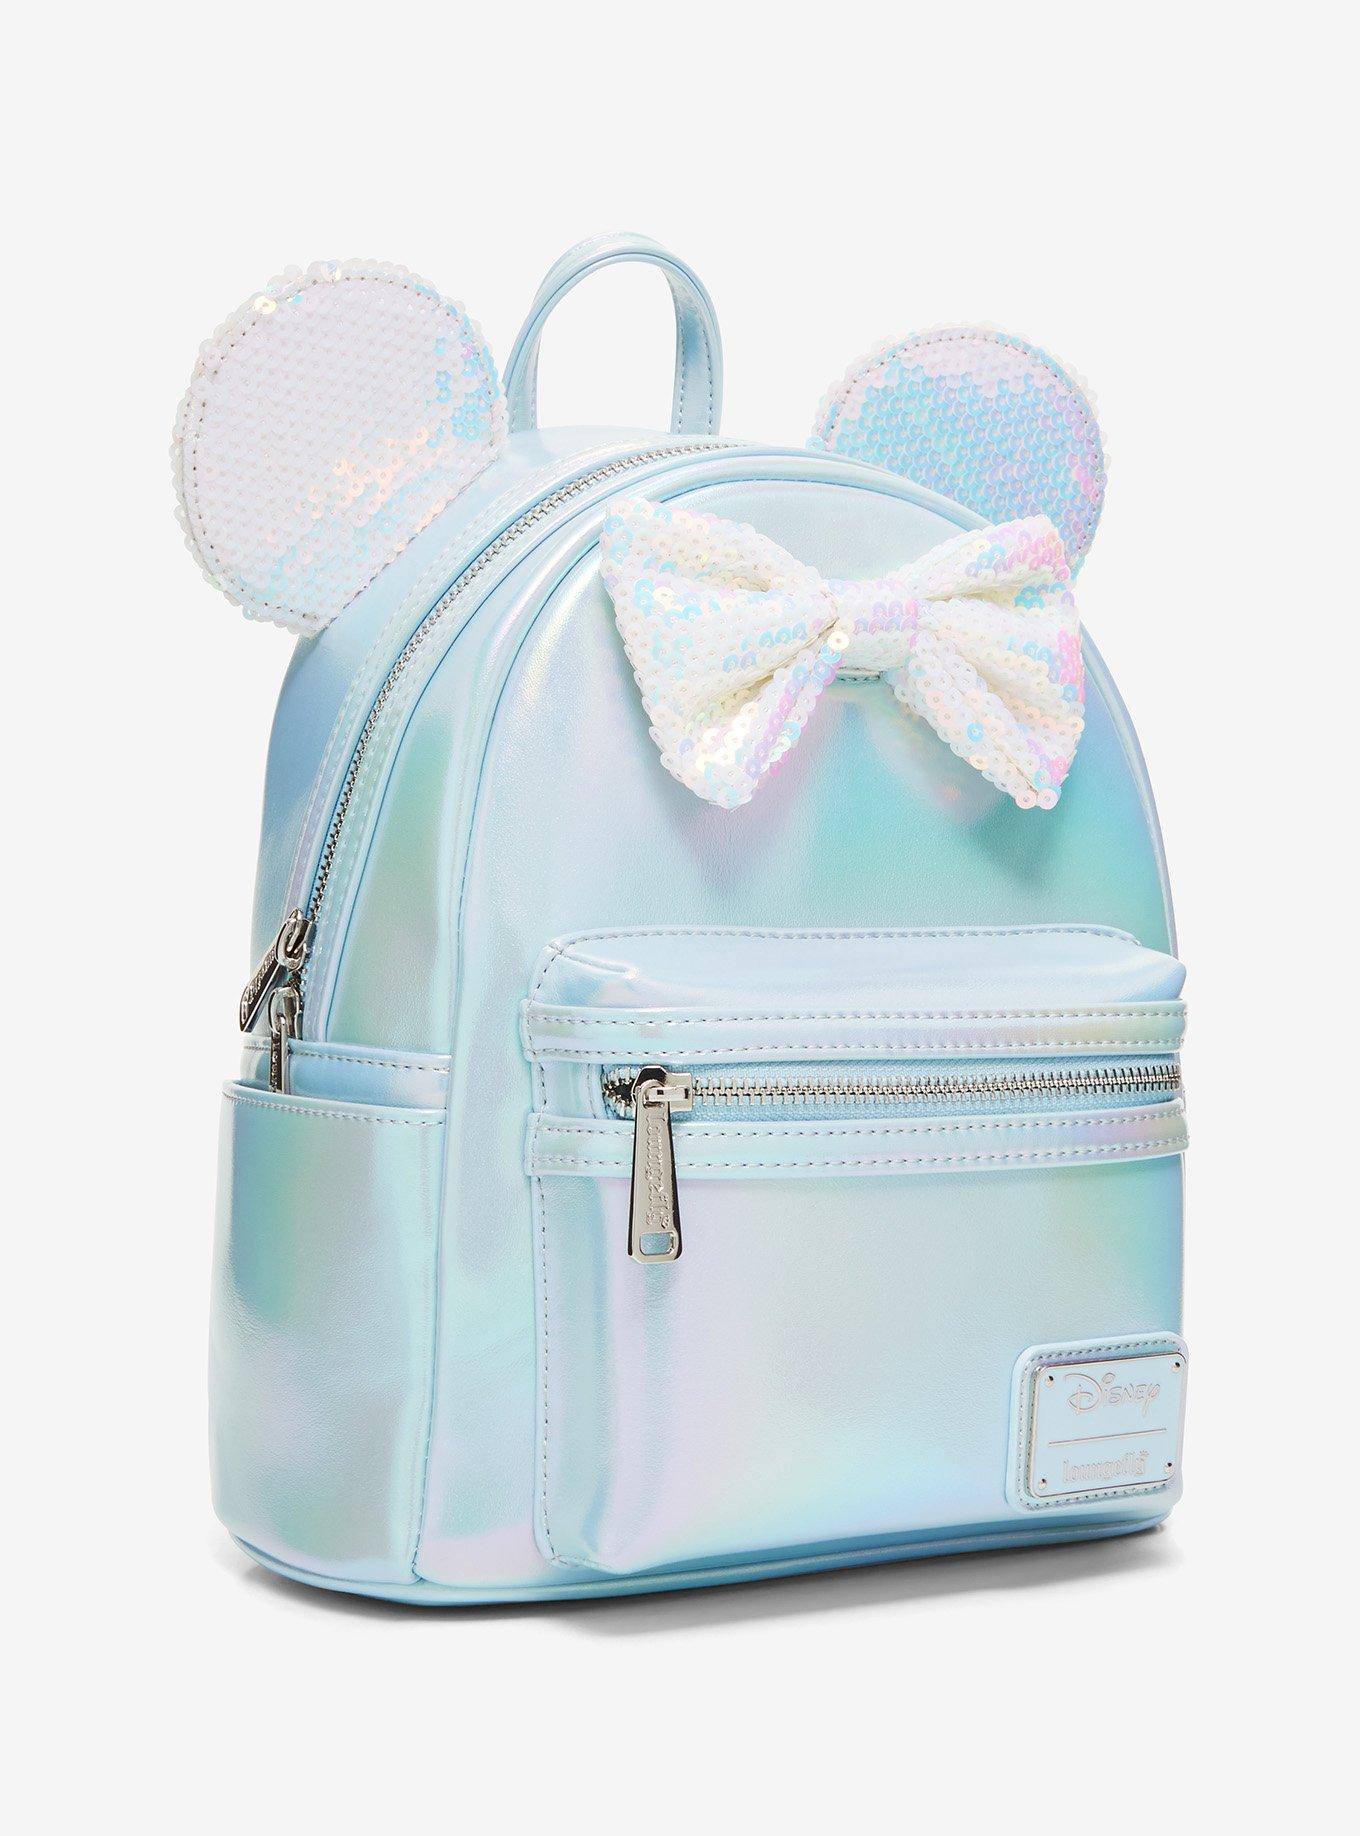 Loungefly Disney Minnie Mouse Denim Patch Backpack - BoxLunch Exclusive, BoxLunch